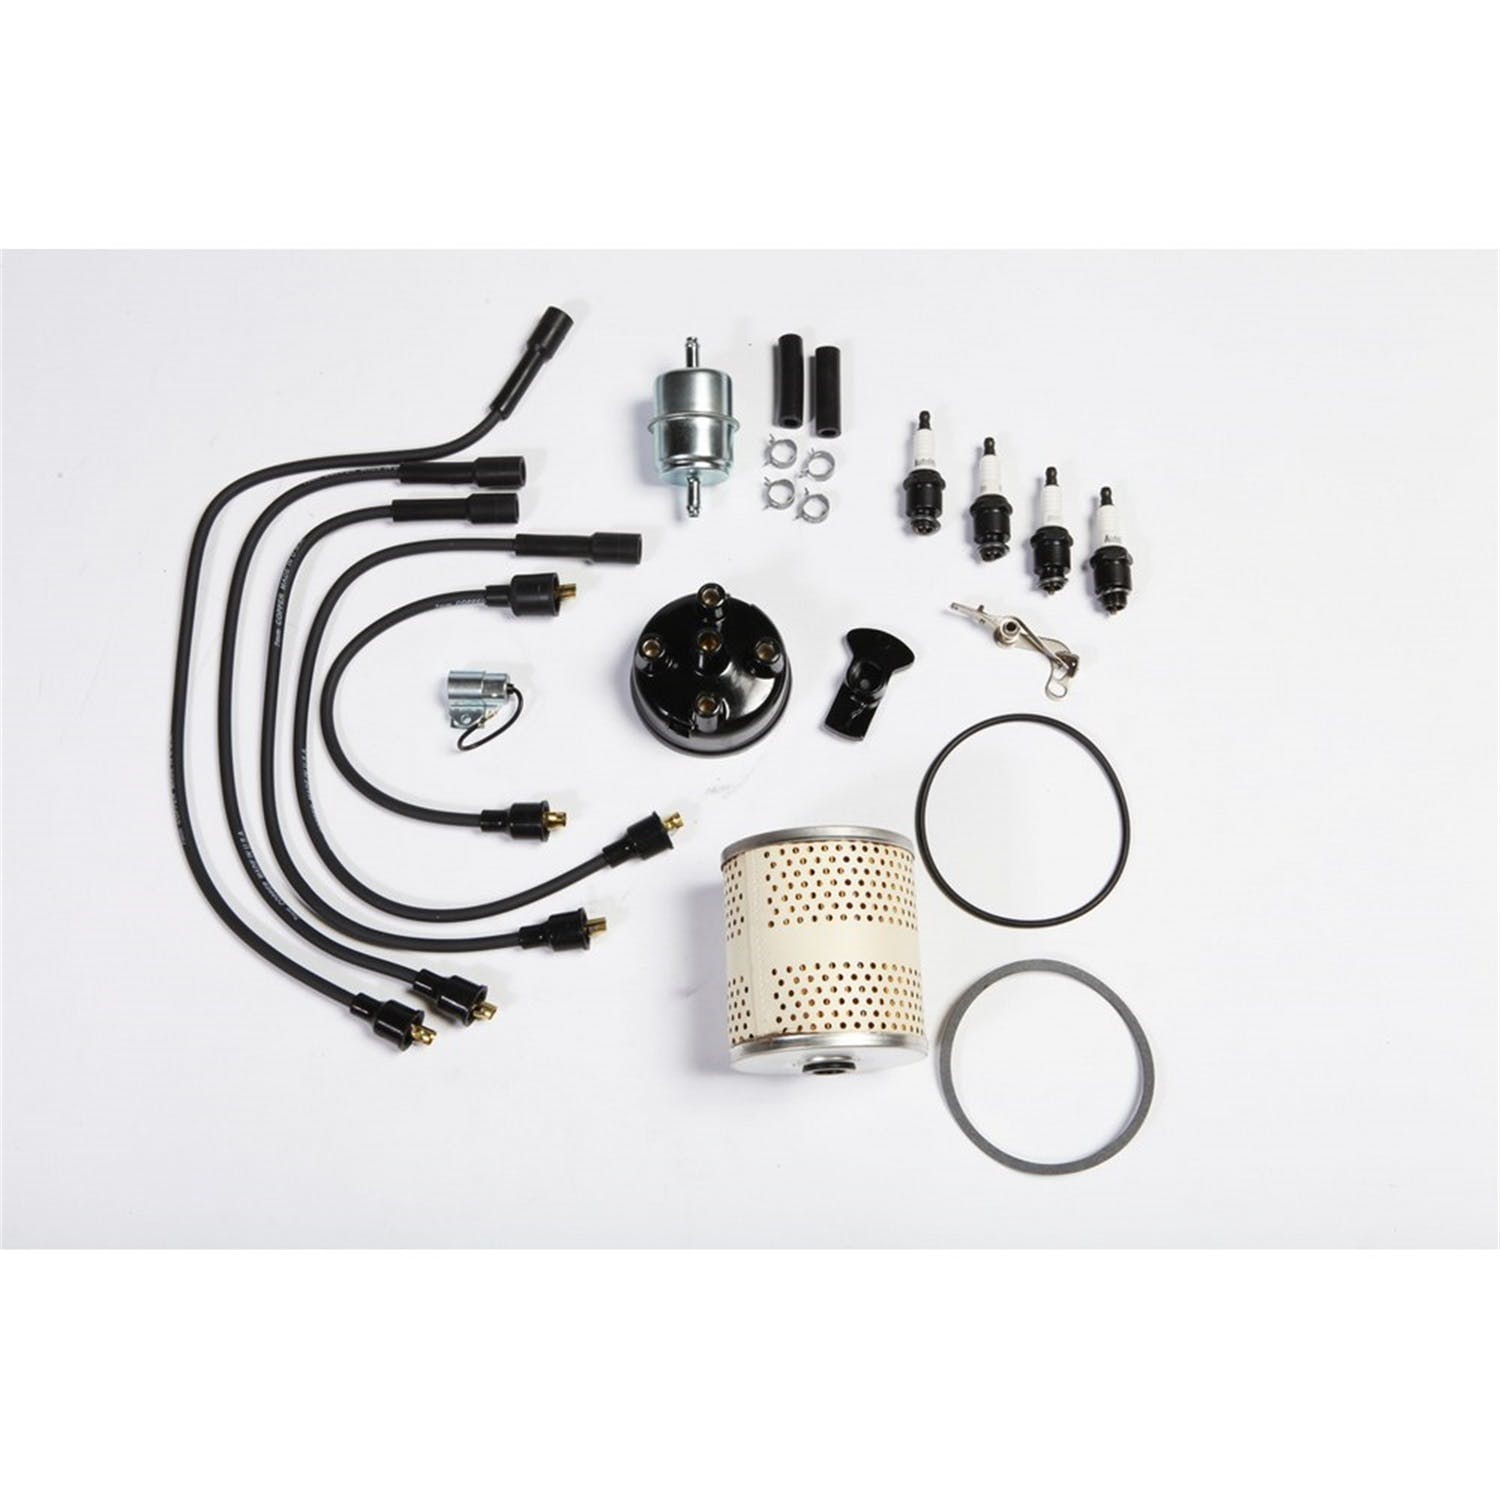 Omix-ADA 17257.72 Ignition Tune Up Kit